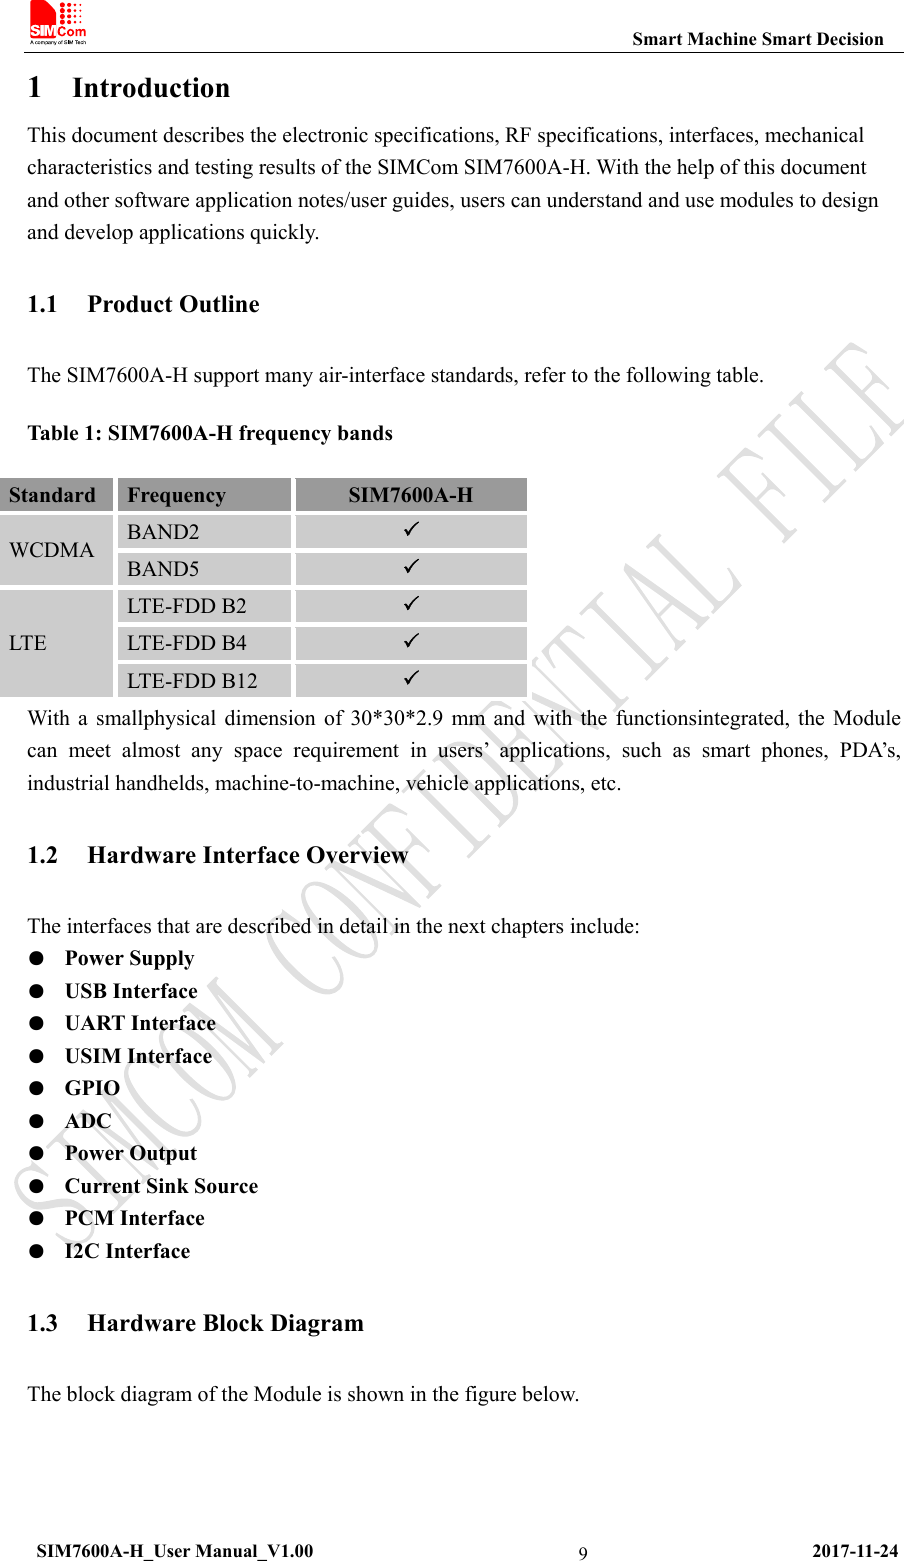                                                           Smart Machine Smart Decision  SIM7600A-H_User Manual_V1.00                                                     2017-11-24 91 Introduction This document describes the electronic specifications, RF specifications, interfaces, mechanical characteristics and testing results of the SIMCom SIM7600A-H. With the help of this document and other software application notes/user guides, users can understand and use modules to design and develop applications quickly. 1.1 Product Outline The SIM7600A-H support many air-interface standards, refer to the following table. Table 1: SIM7600A-H frequency bands Standard  Frequency  SIM7600A-H WCDMA  BAND2   BAND5   LTE LTE-FDD B2   LTE-FDD B4   LTE-FDD B12   With a smallphysical dimension of 30*30*2.9 mm and with the functionsintegrated, the Module can meet almost any space requirement in users’ applications, such as smart phones, PDA’s, industrial handhelds, machine-to-machine, vehicle applications, etc. 1.2 Hardware Interface Overview The interfaces that are described in detail in the next chapters include: ●  Power Supply ●  USB Interface ●  UART Interface ●  USIM Interface ●  GPIO ●  ADC ●  Power Output ●  Current Sink Source ●  PCM Interface ●  I2C Interface 1.3 Hardware Block Diagram The block diagram of the Module is shown in the figure below. 